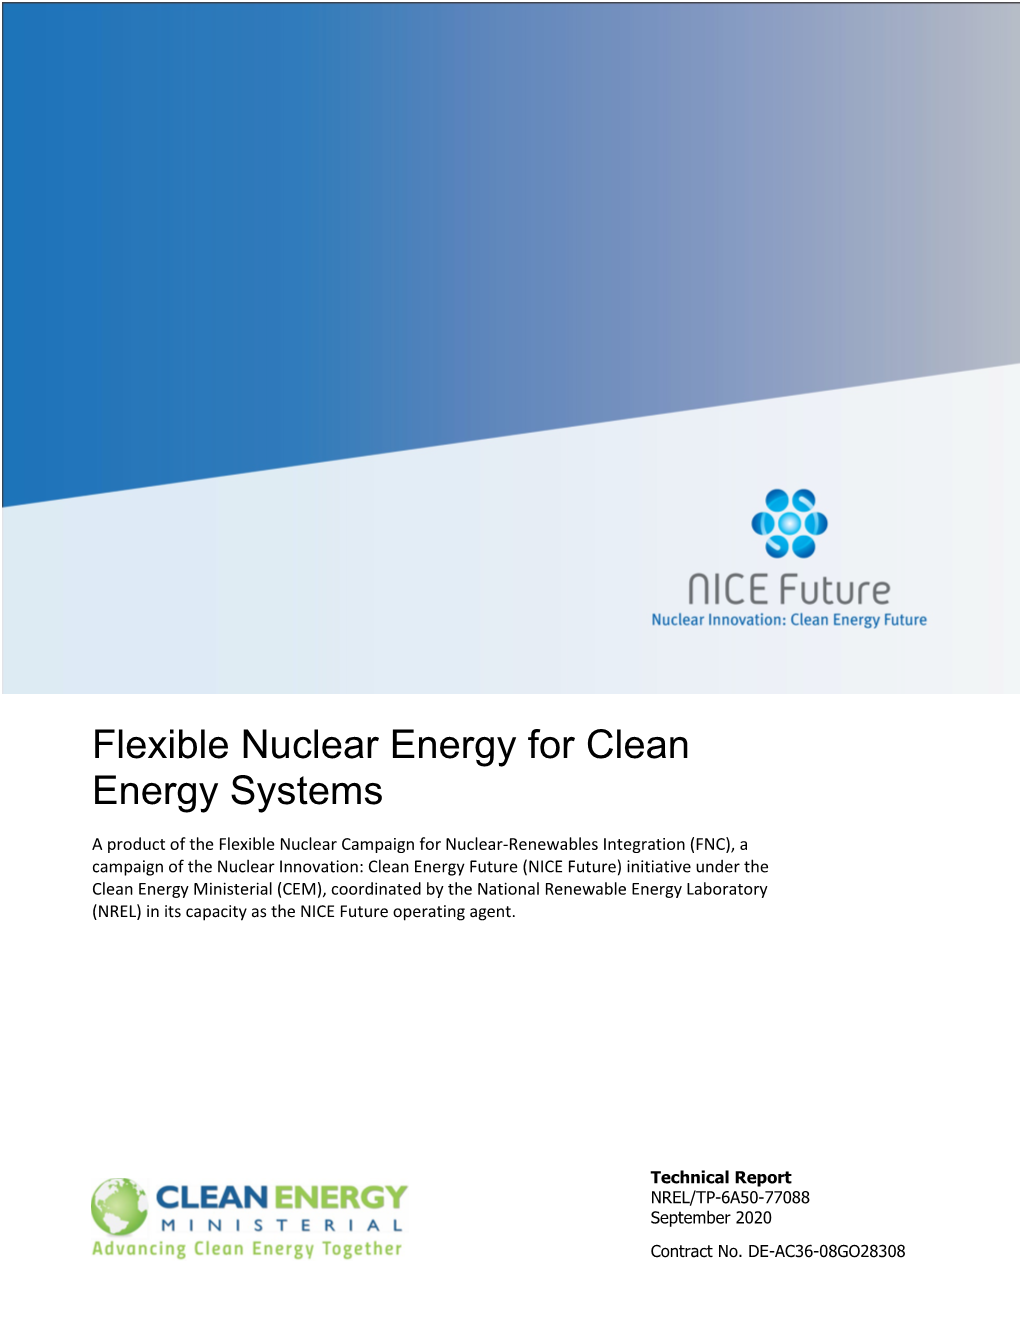 Flexible Nuclear Energy for Clean Energy Systems